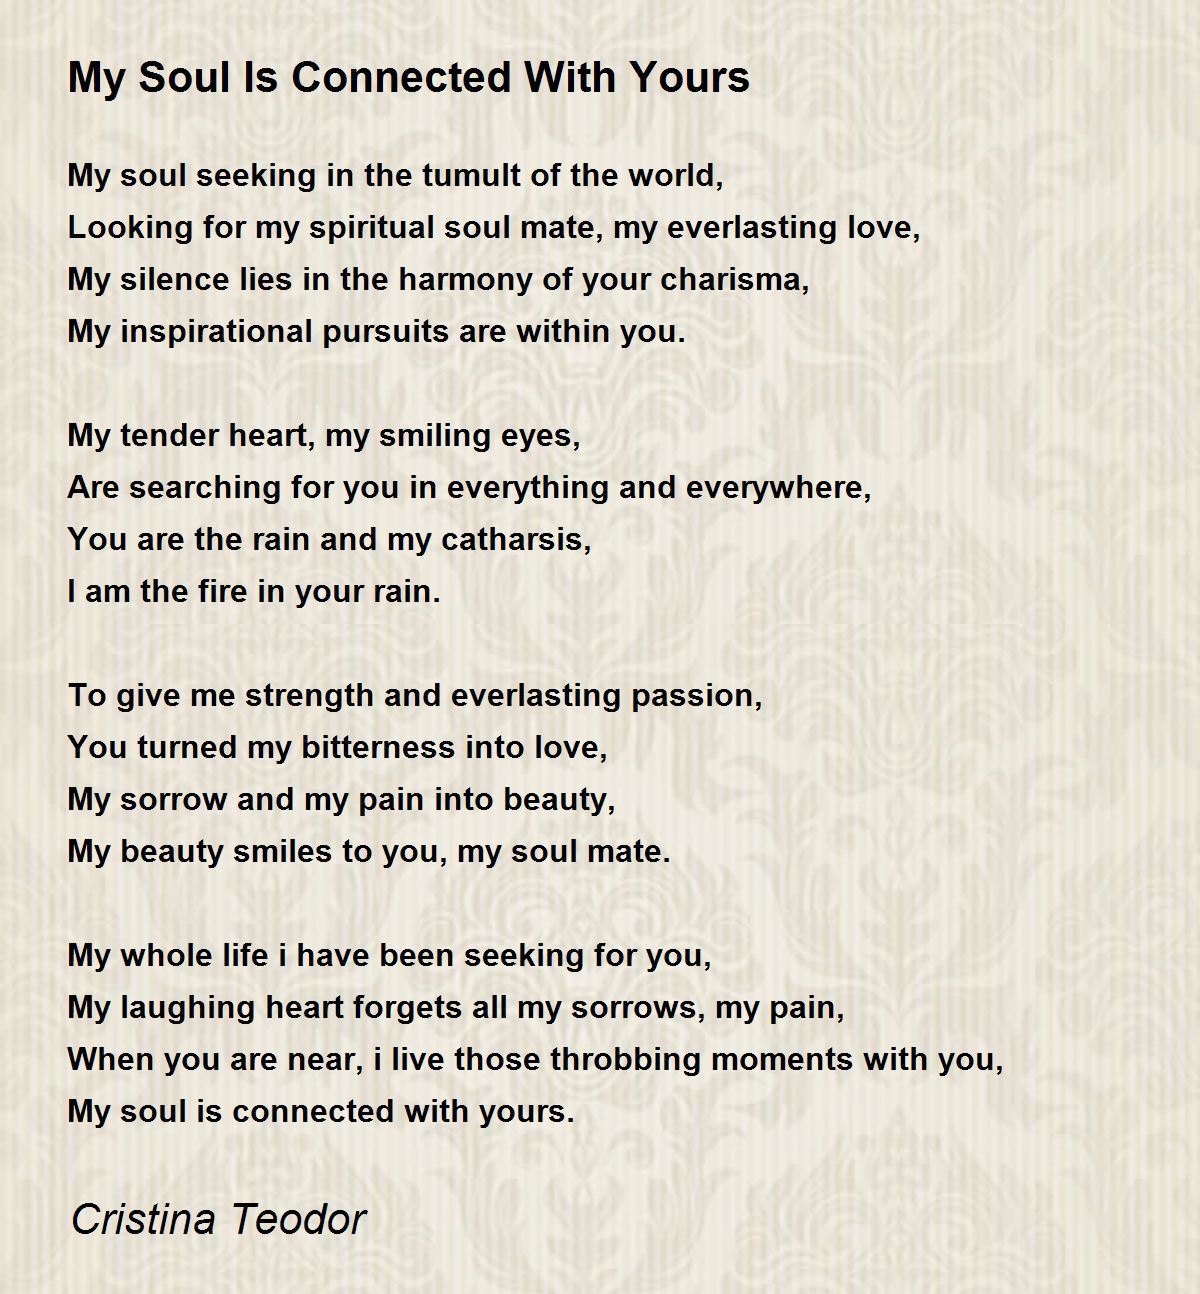 Soulmate poem searching for my The 45